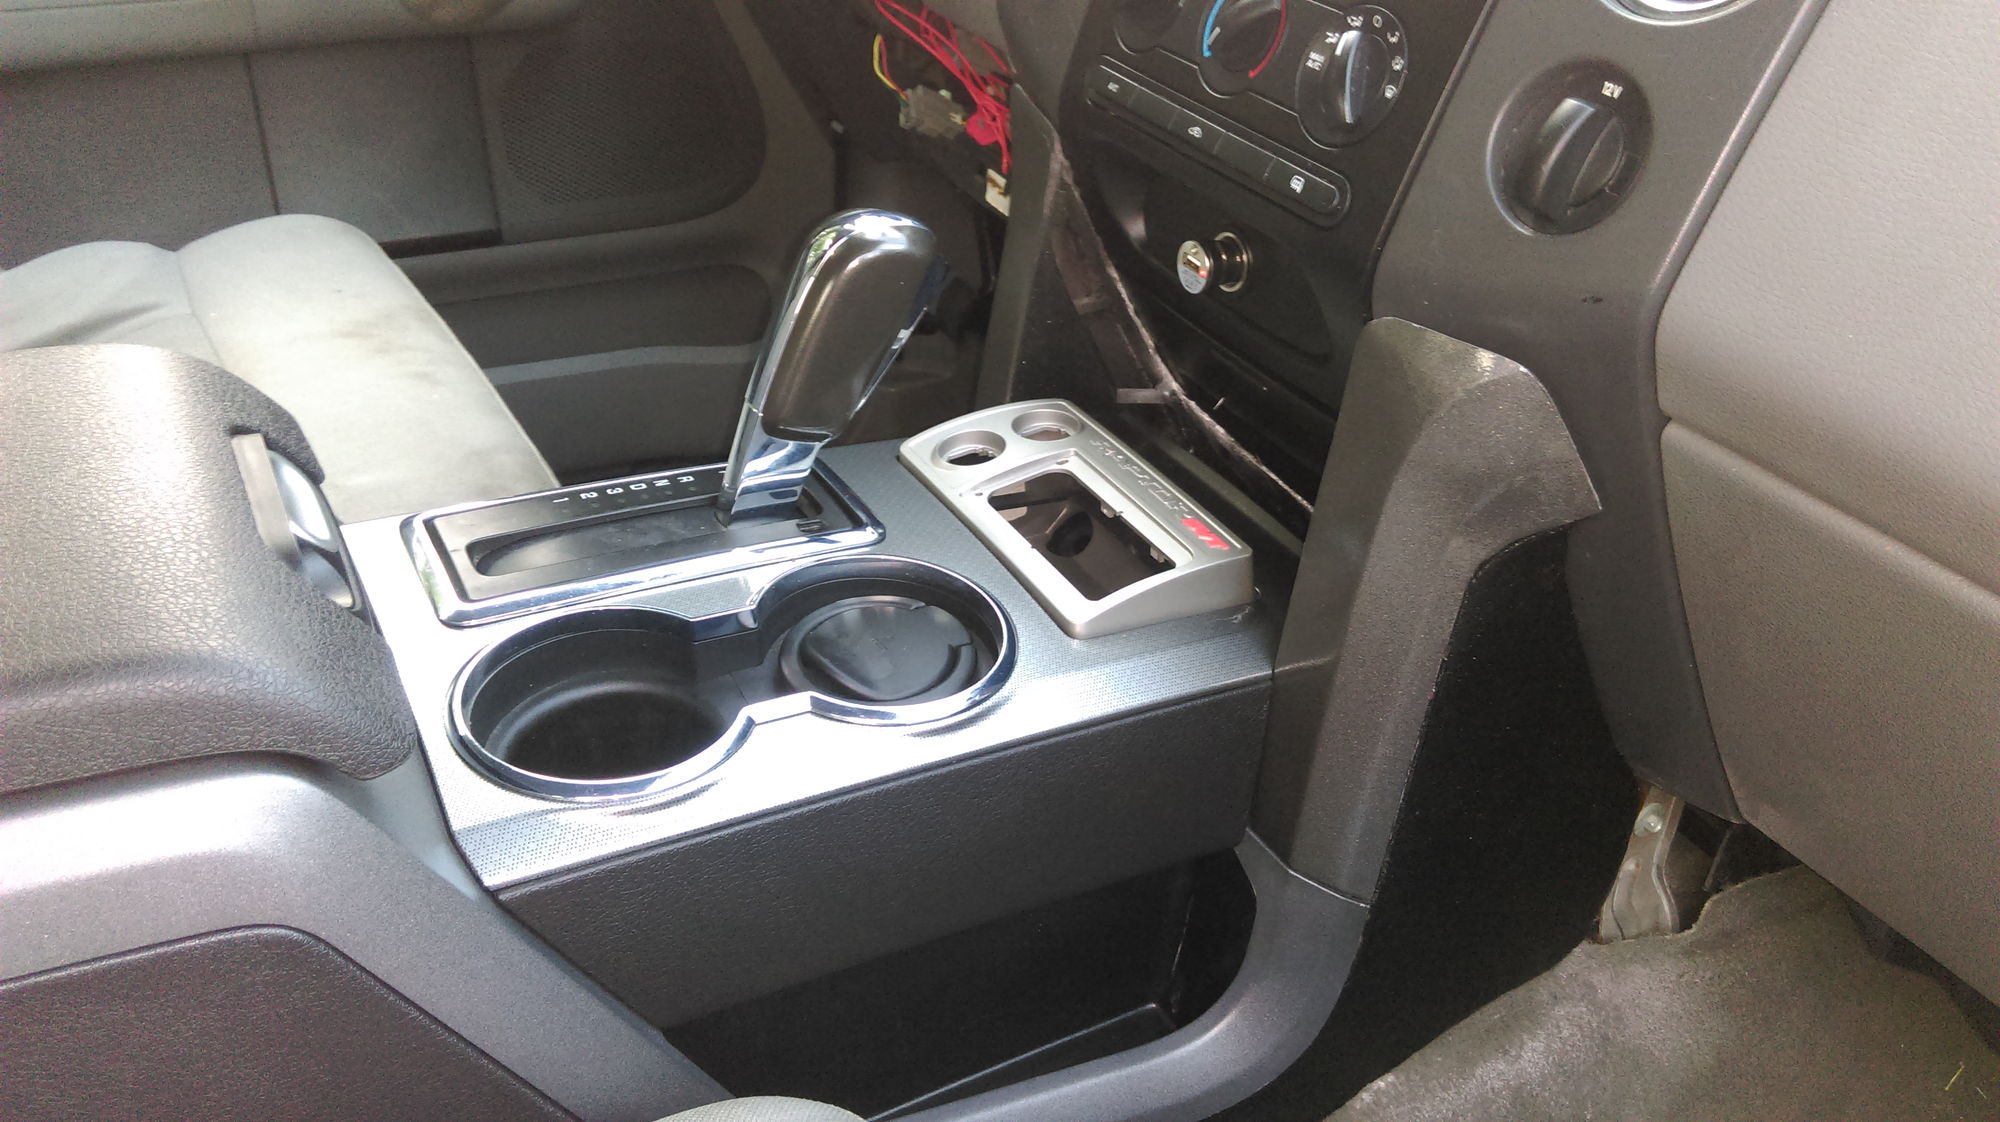 2012 Raptor Console in a 2005 XLT - F150online Forums